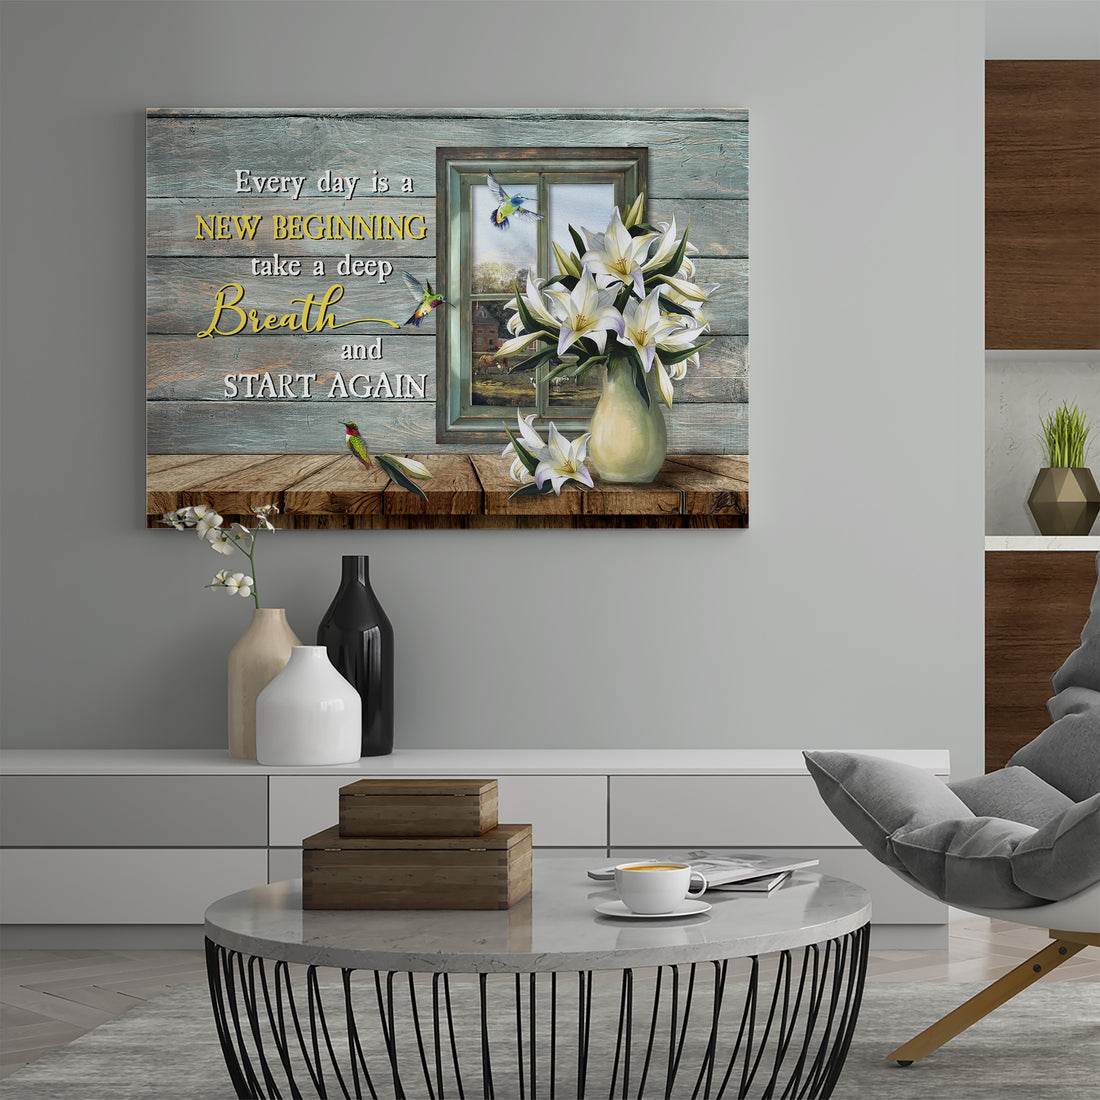 Poster Frames, Everyday Is A New Beginning Sign, Lily Flower Pictures, Hummingbird Images, Farmhouse Gifts, House Decorations